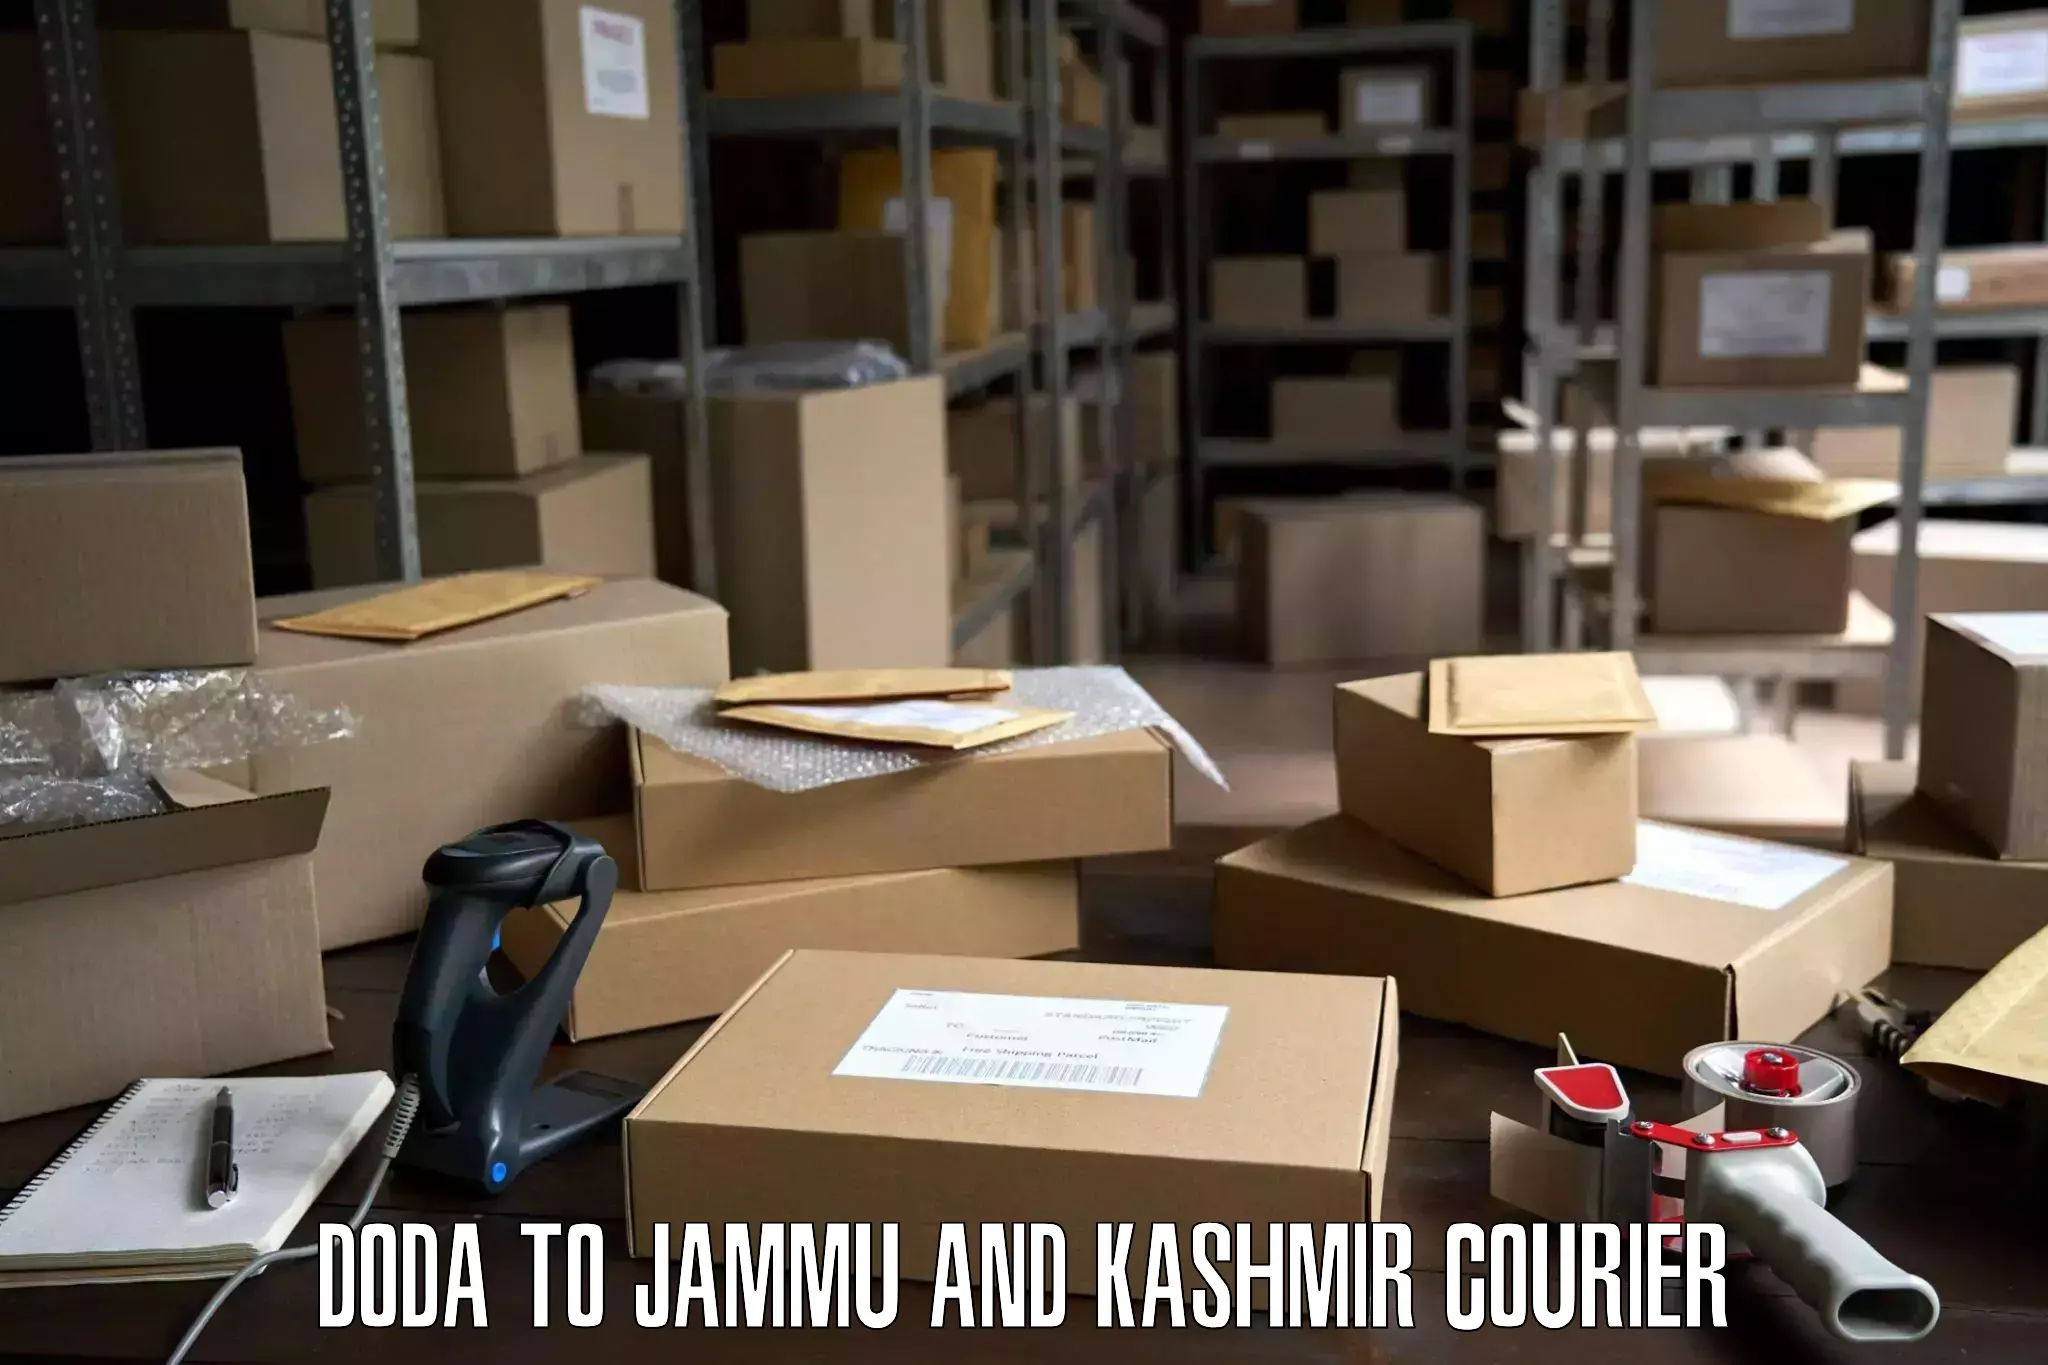 Packing and moving services Doda to Srinagar Kashmir